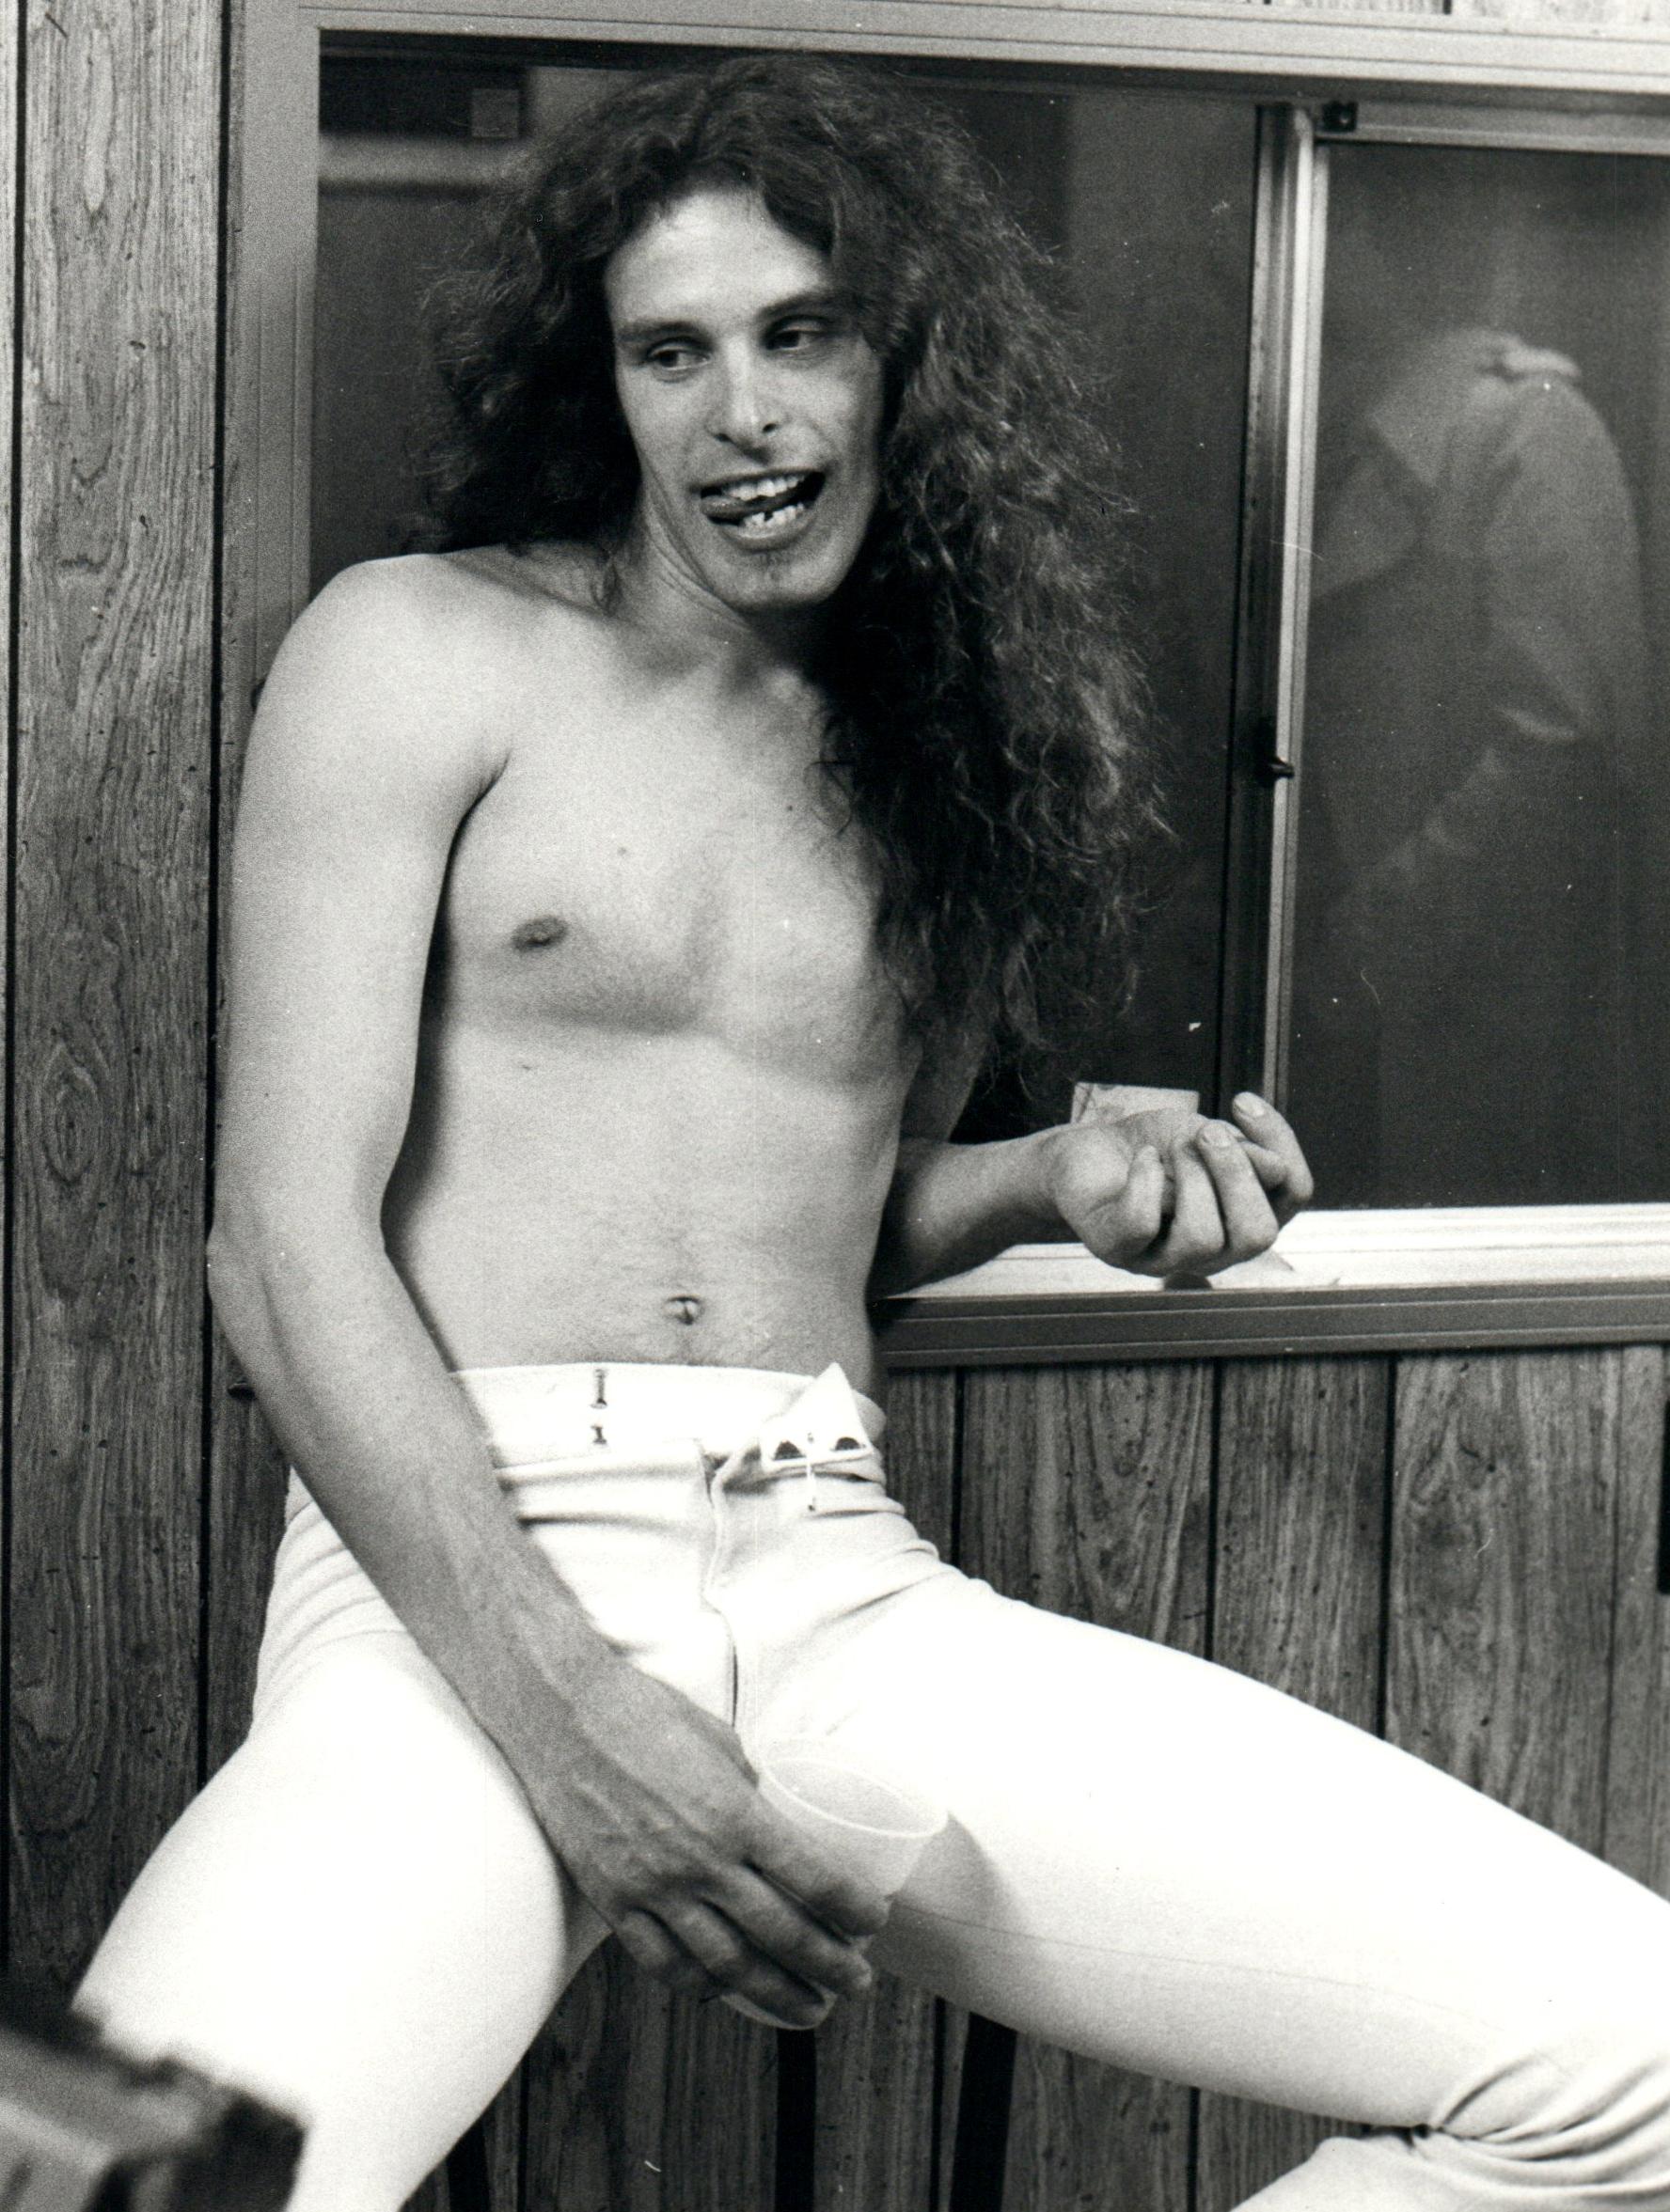 Chris Walter Black and White Photograph - Ted Nugent Shirtless Vintage Original Photograph